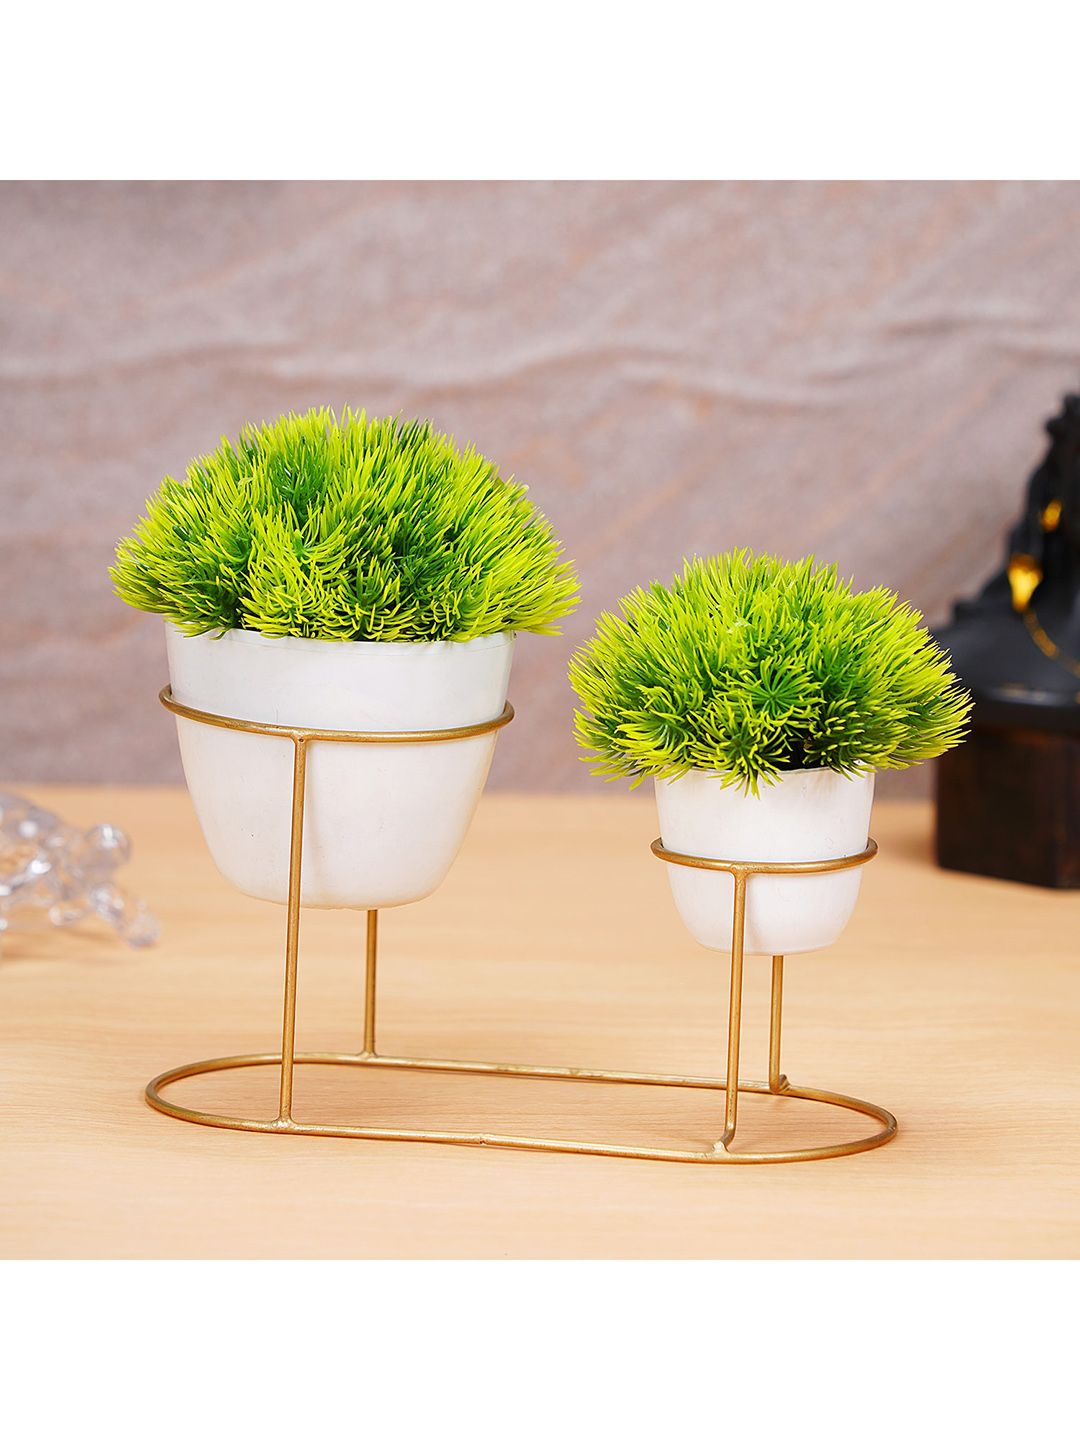 Dekorly Set of 2 Artificial Green Grass Wild Bonsai Plant With Pot and Metal Stand Price in India